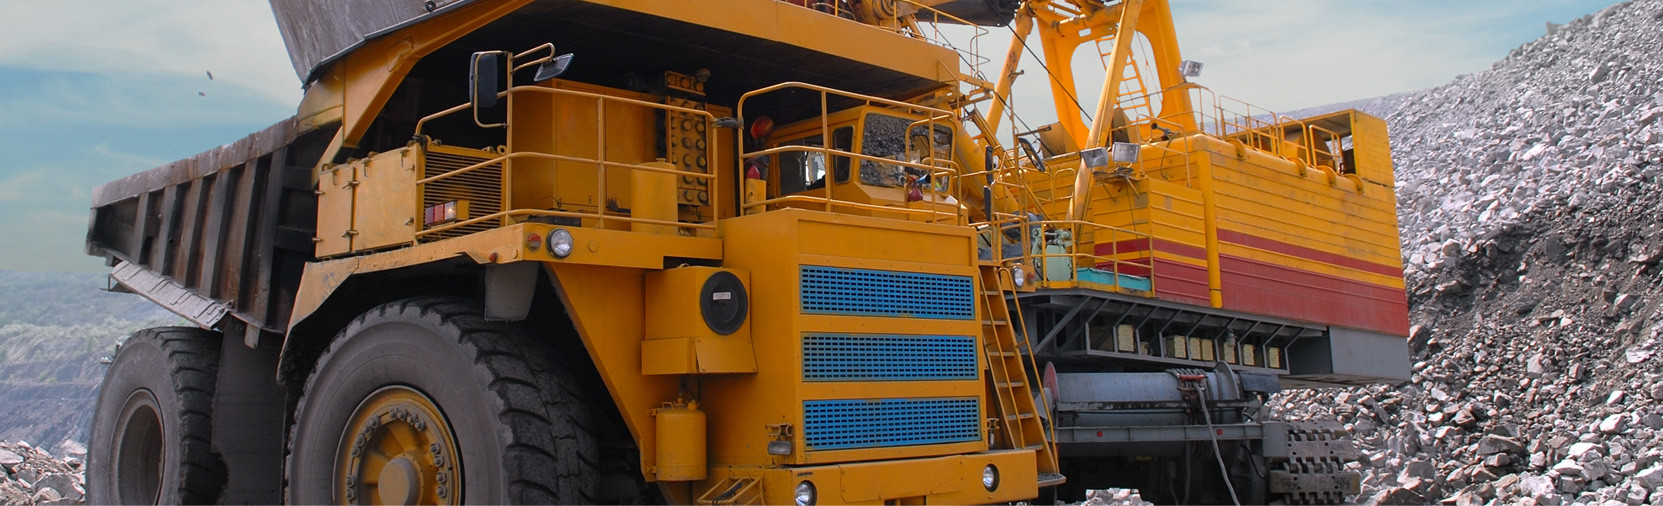 Trade Assistants Mining FIFO Fitters Maintenance QLD-iMINCO.net Mining Information